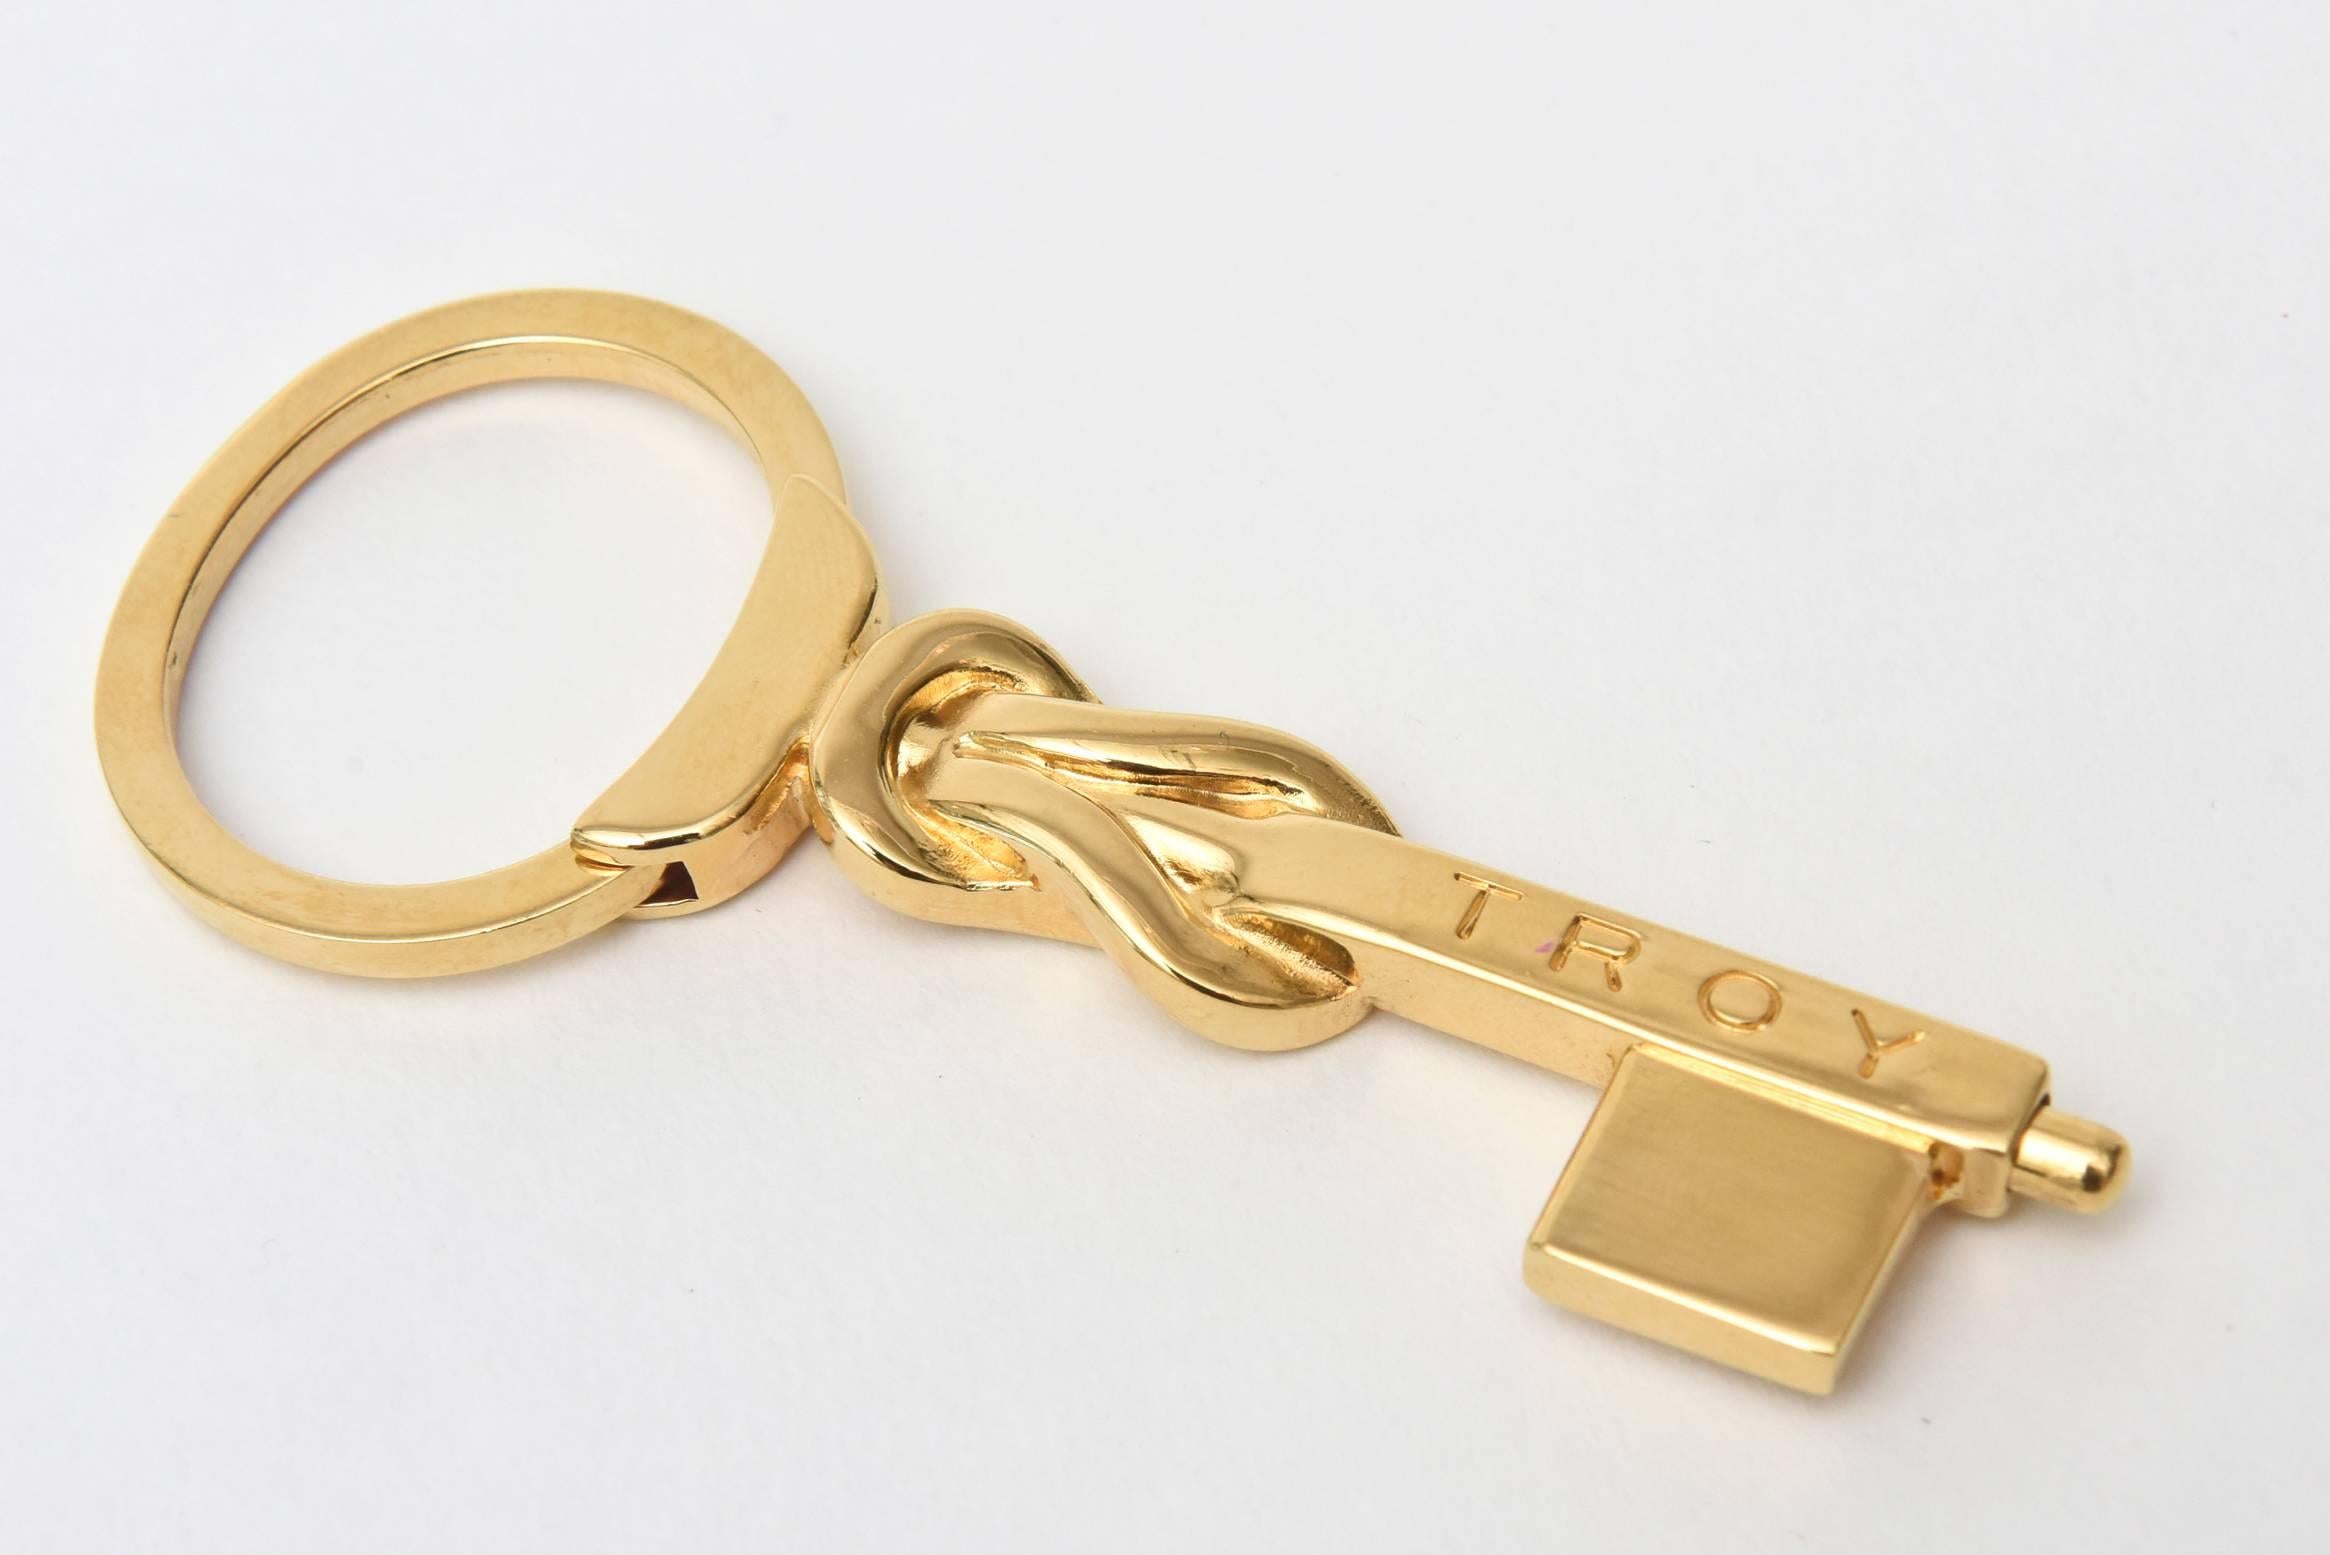 This Italian signed Gucci key chain is just that; a key with a buckle like effect.
It is signed